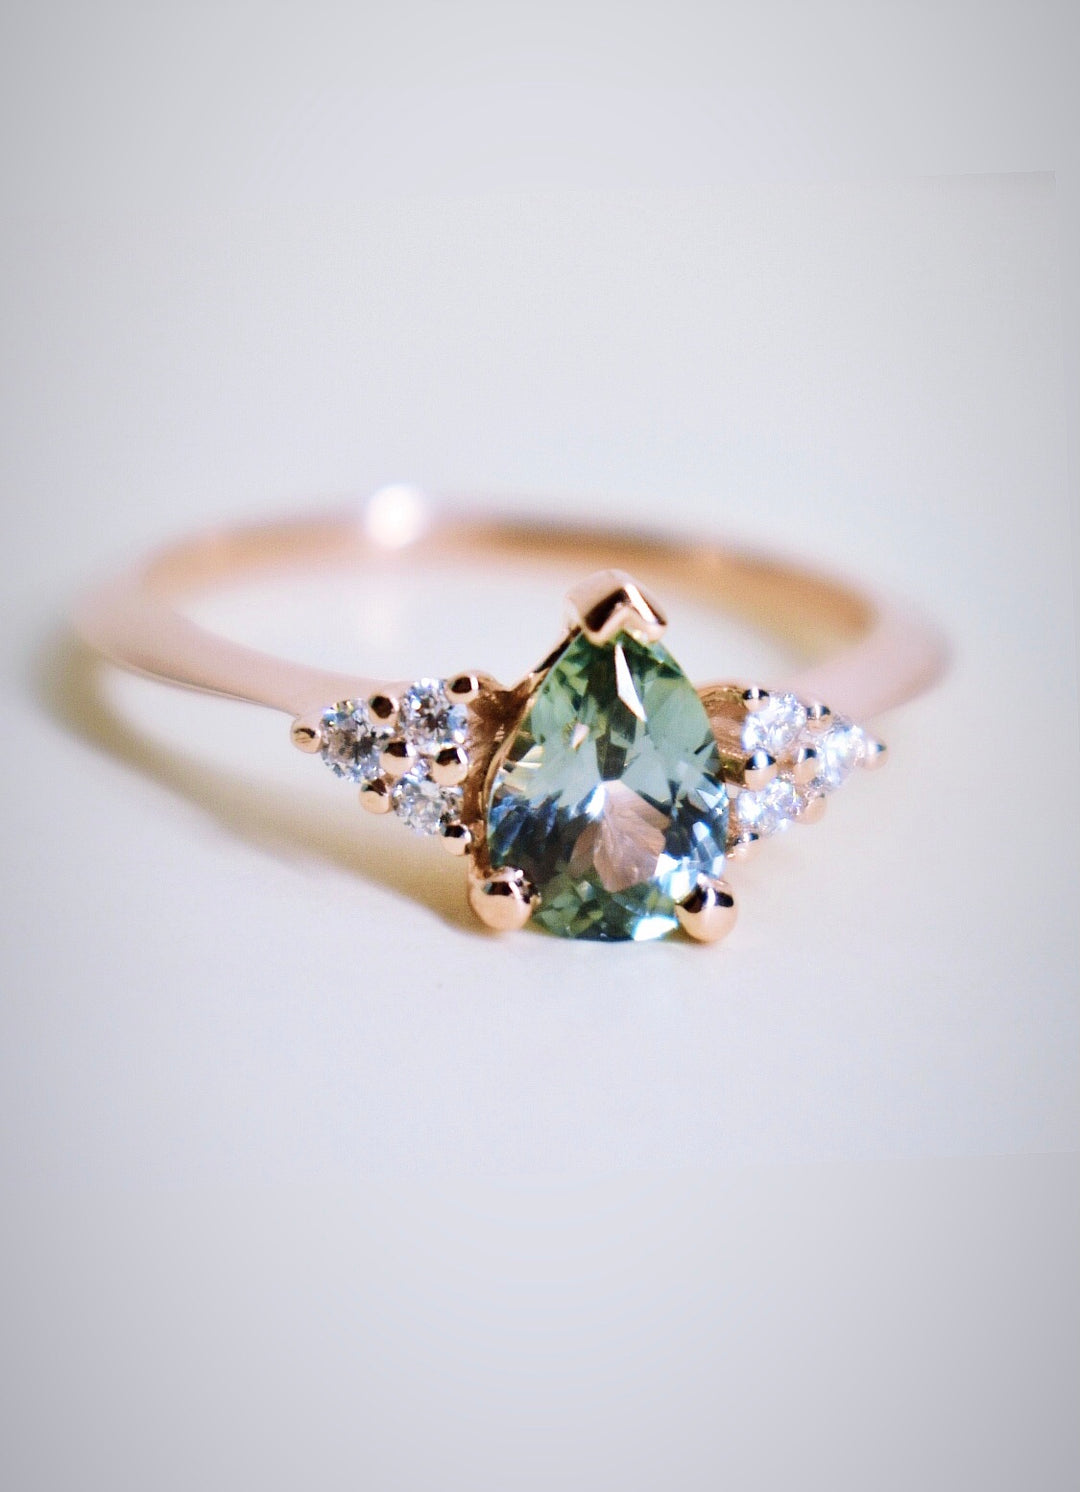 Teal Montana Sapphire Engagement Ring 14K Rose Gold